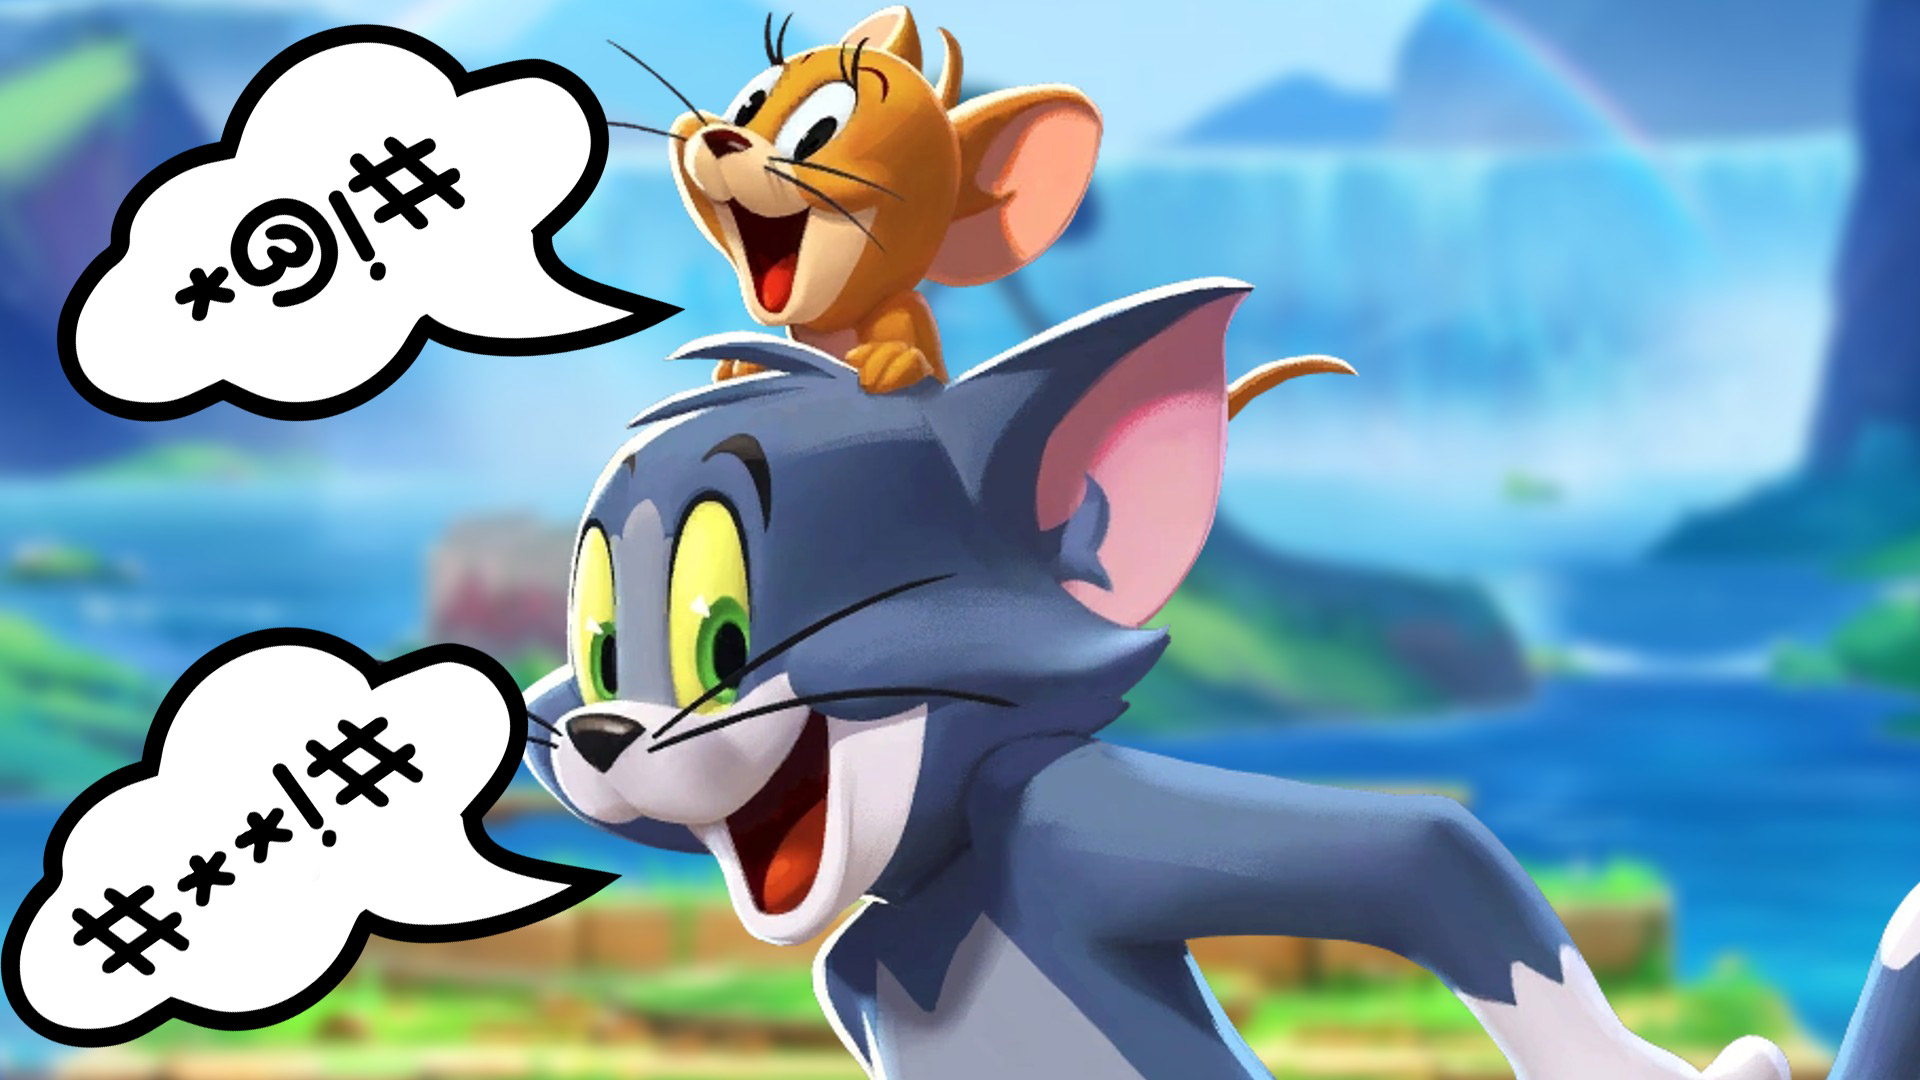 mtuliversus voice chat tom and jerry